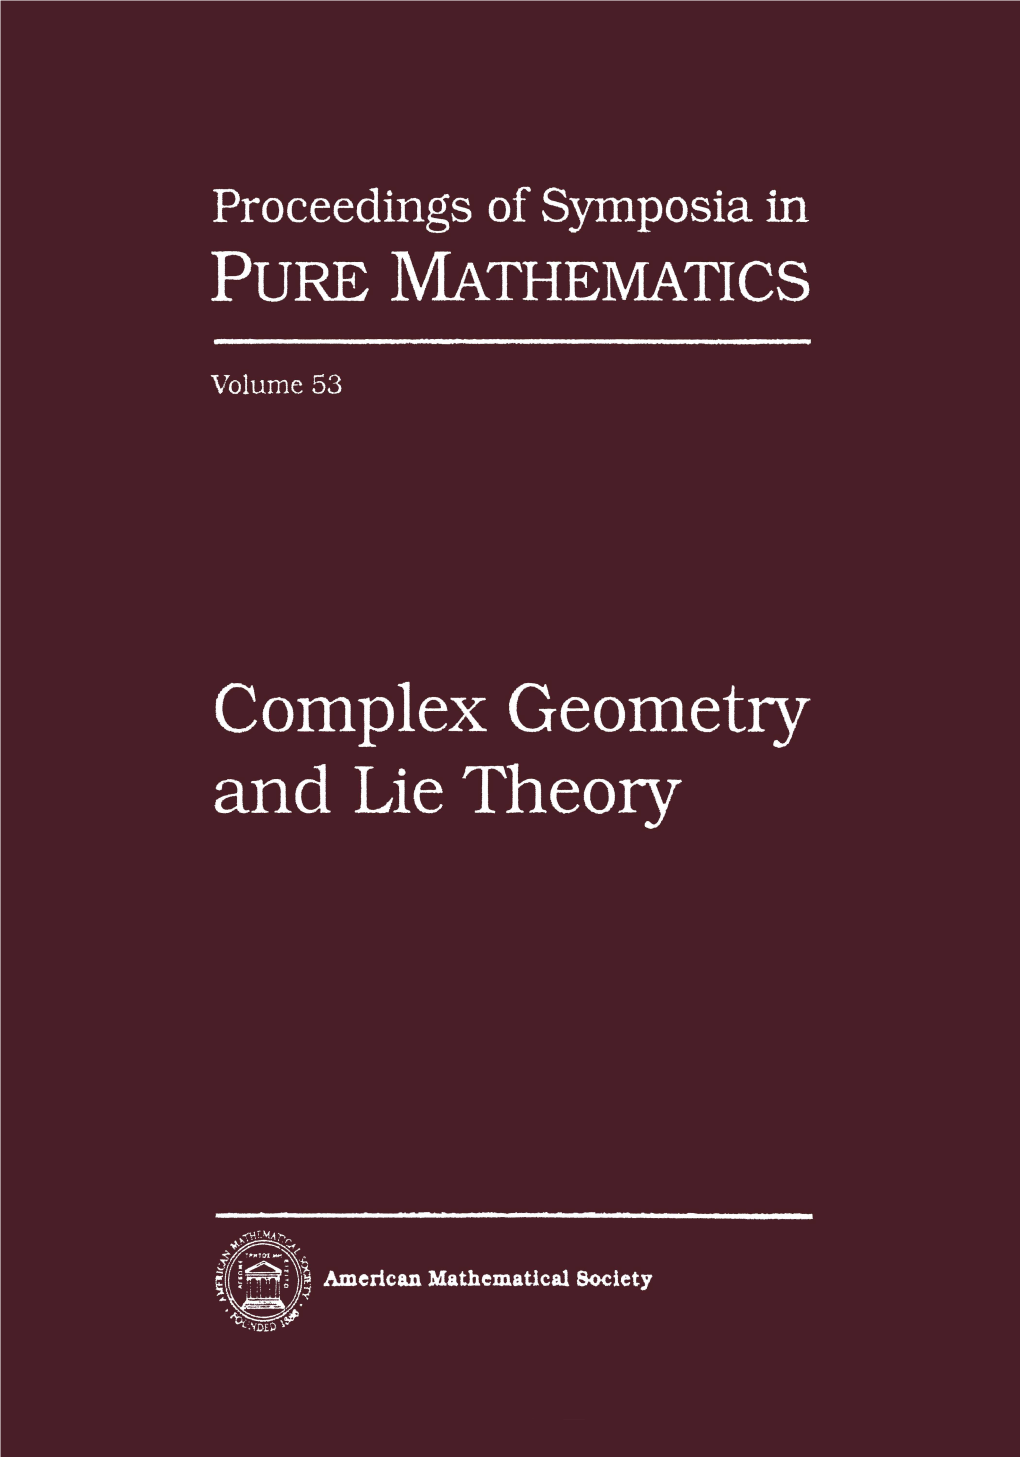 Complex Geometry and Lie Theory Proceedings of Symposia in PURE MATHEMATICS